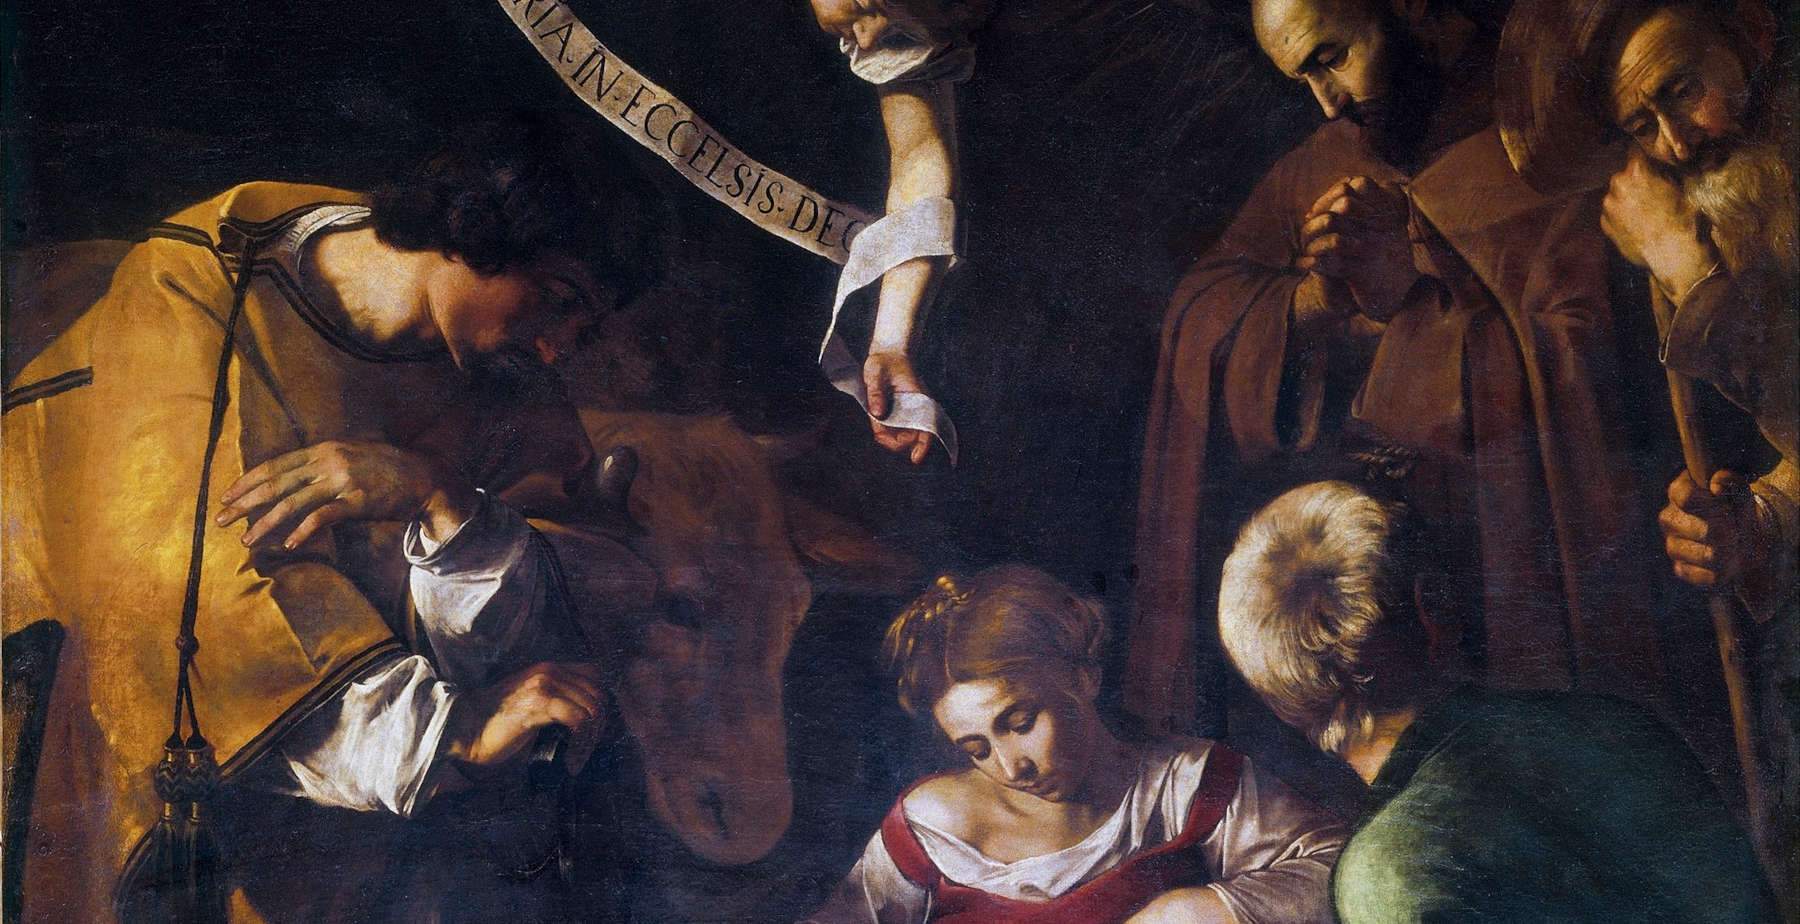 A meeting in Rome on Caravaggio's Nativity stolen in 1969